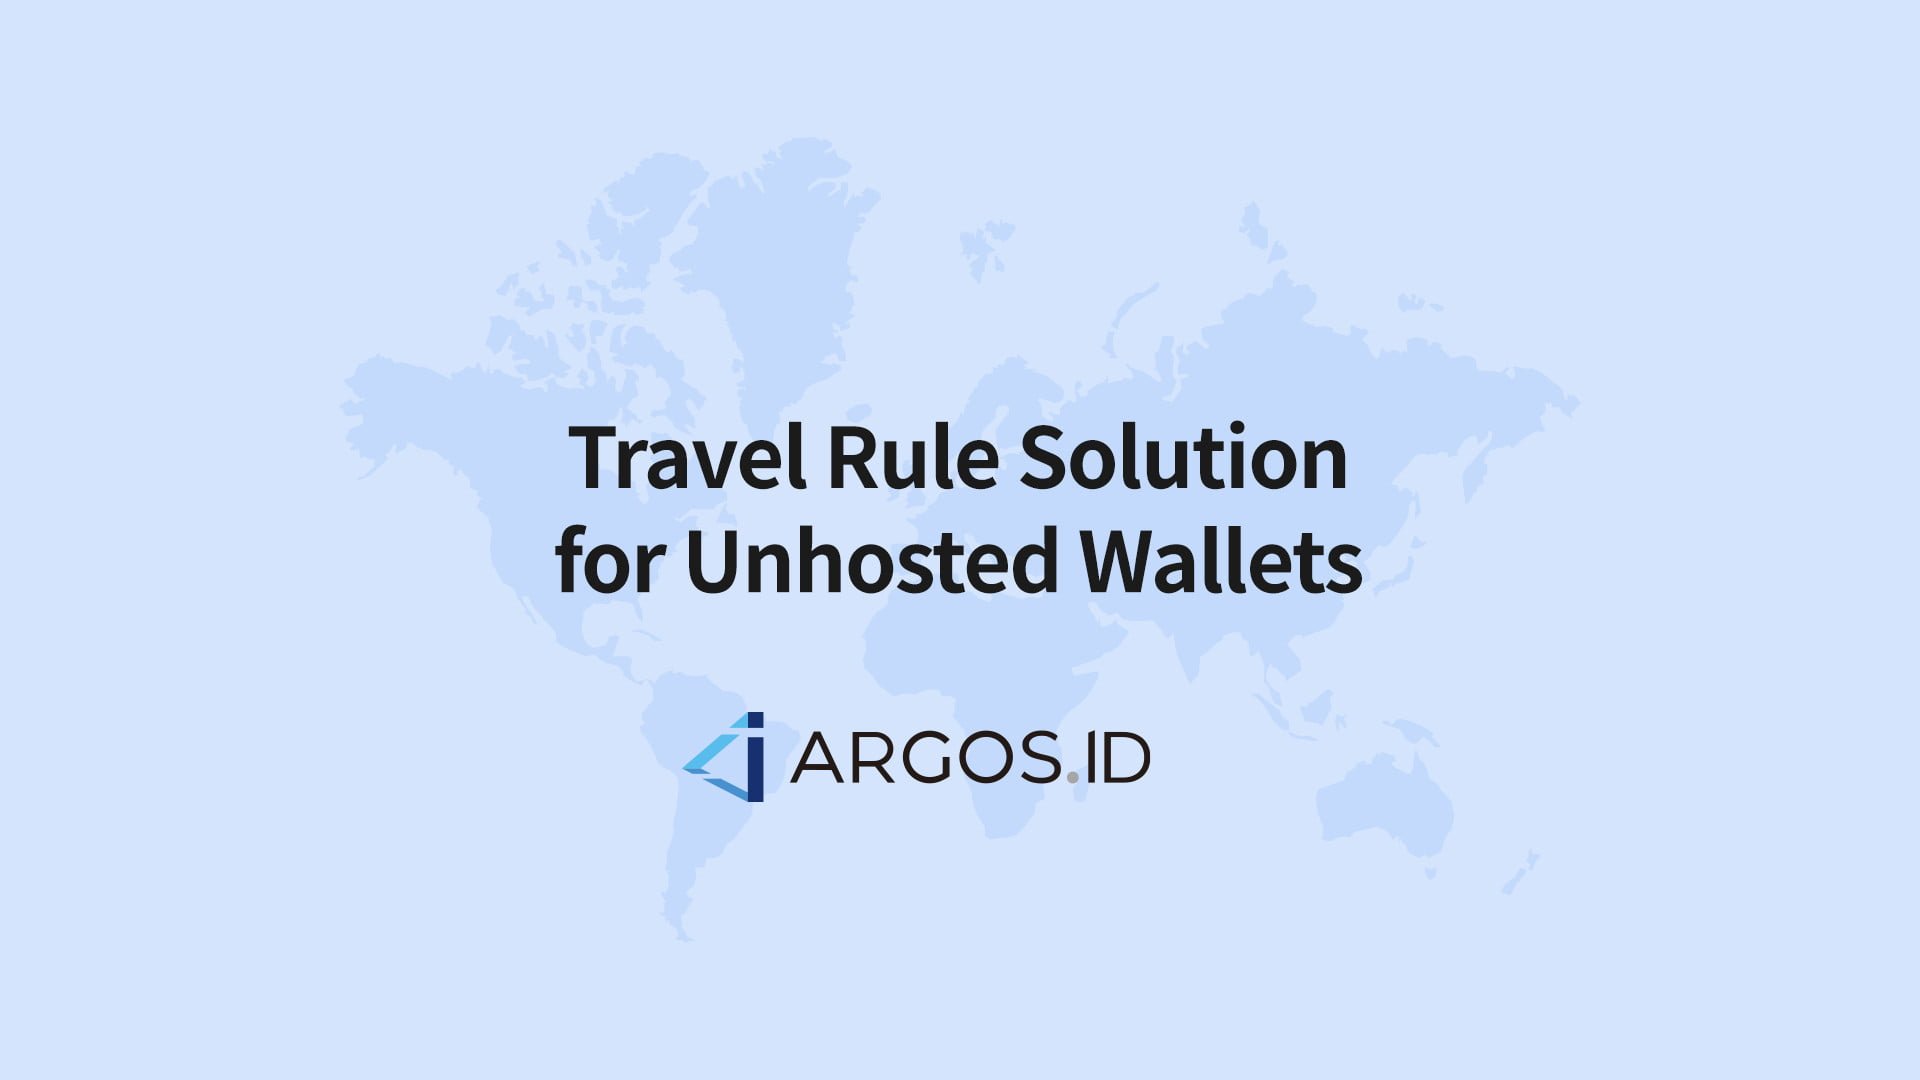 ARGOS ID presents the World’s First Travel Rule Solution for Unhosted Wallets 5